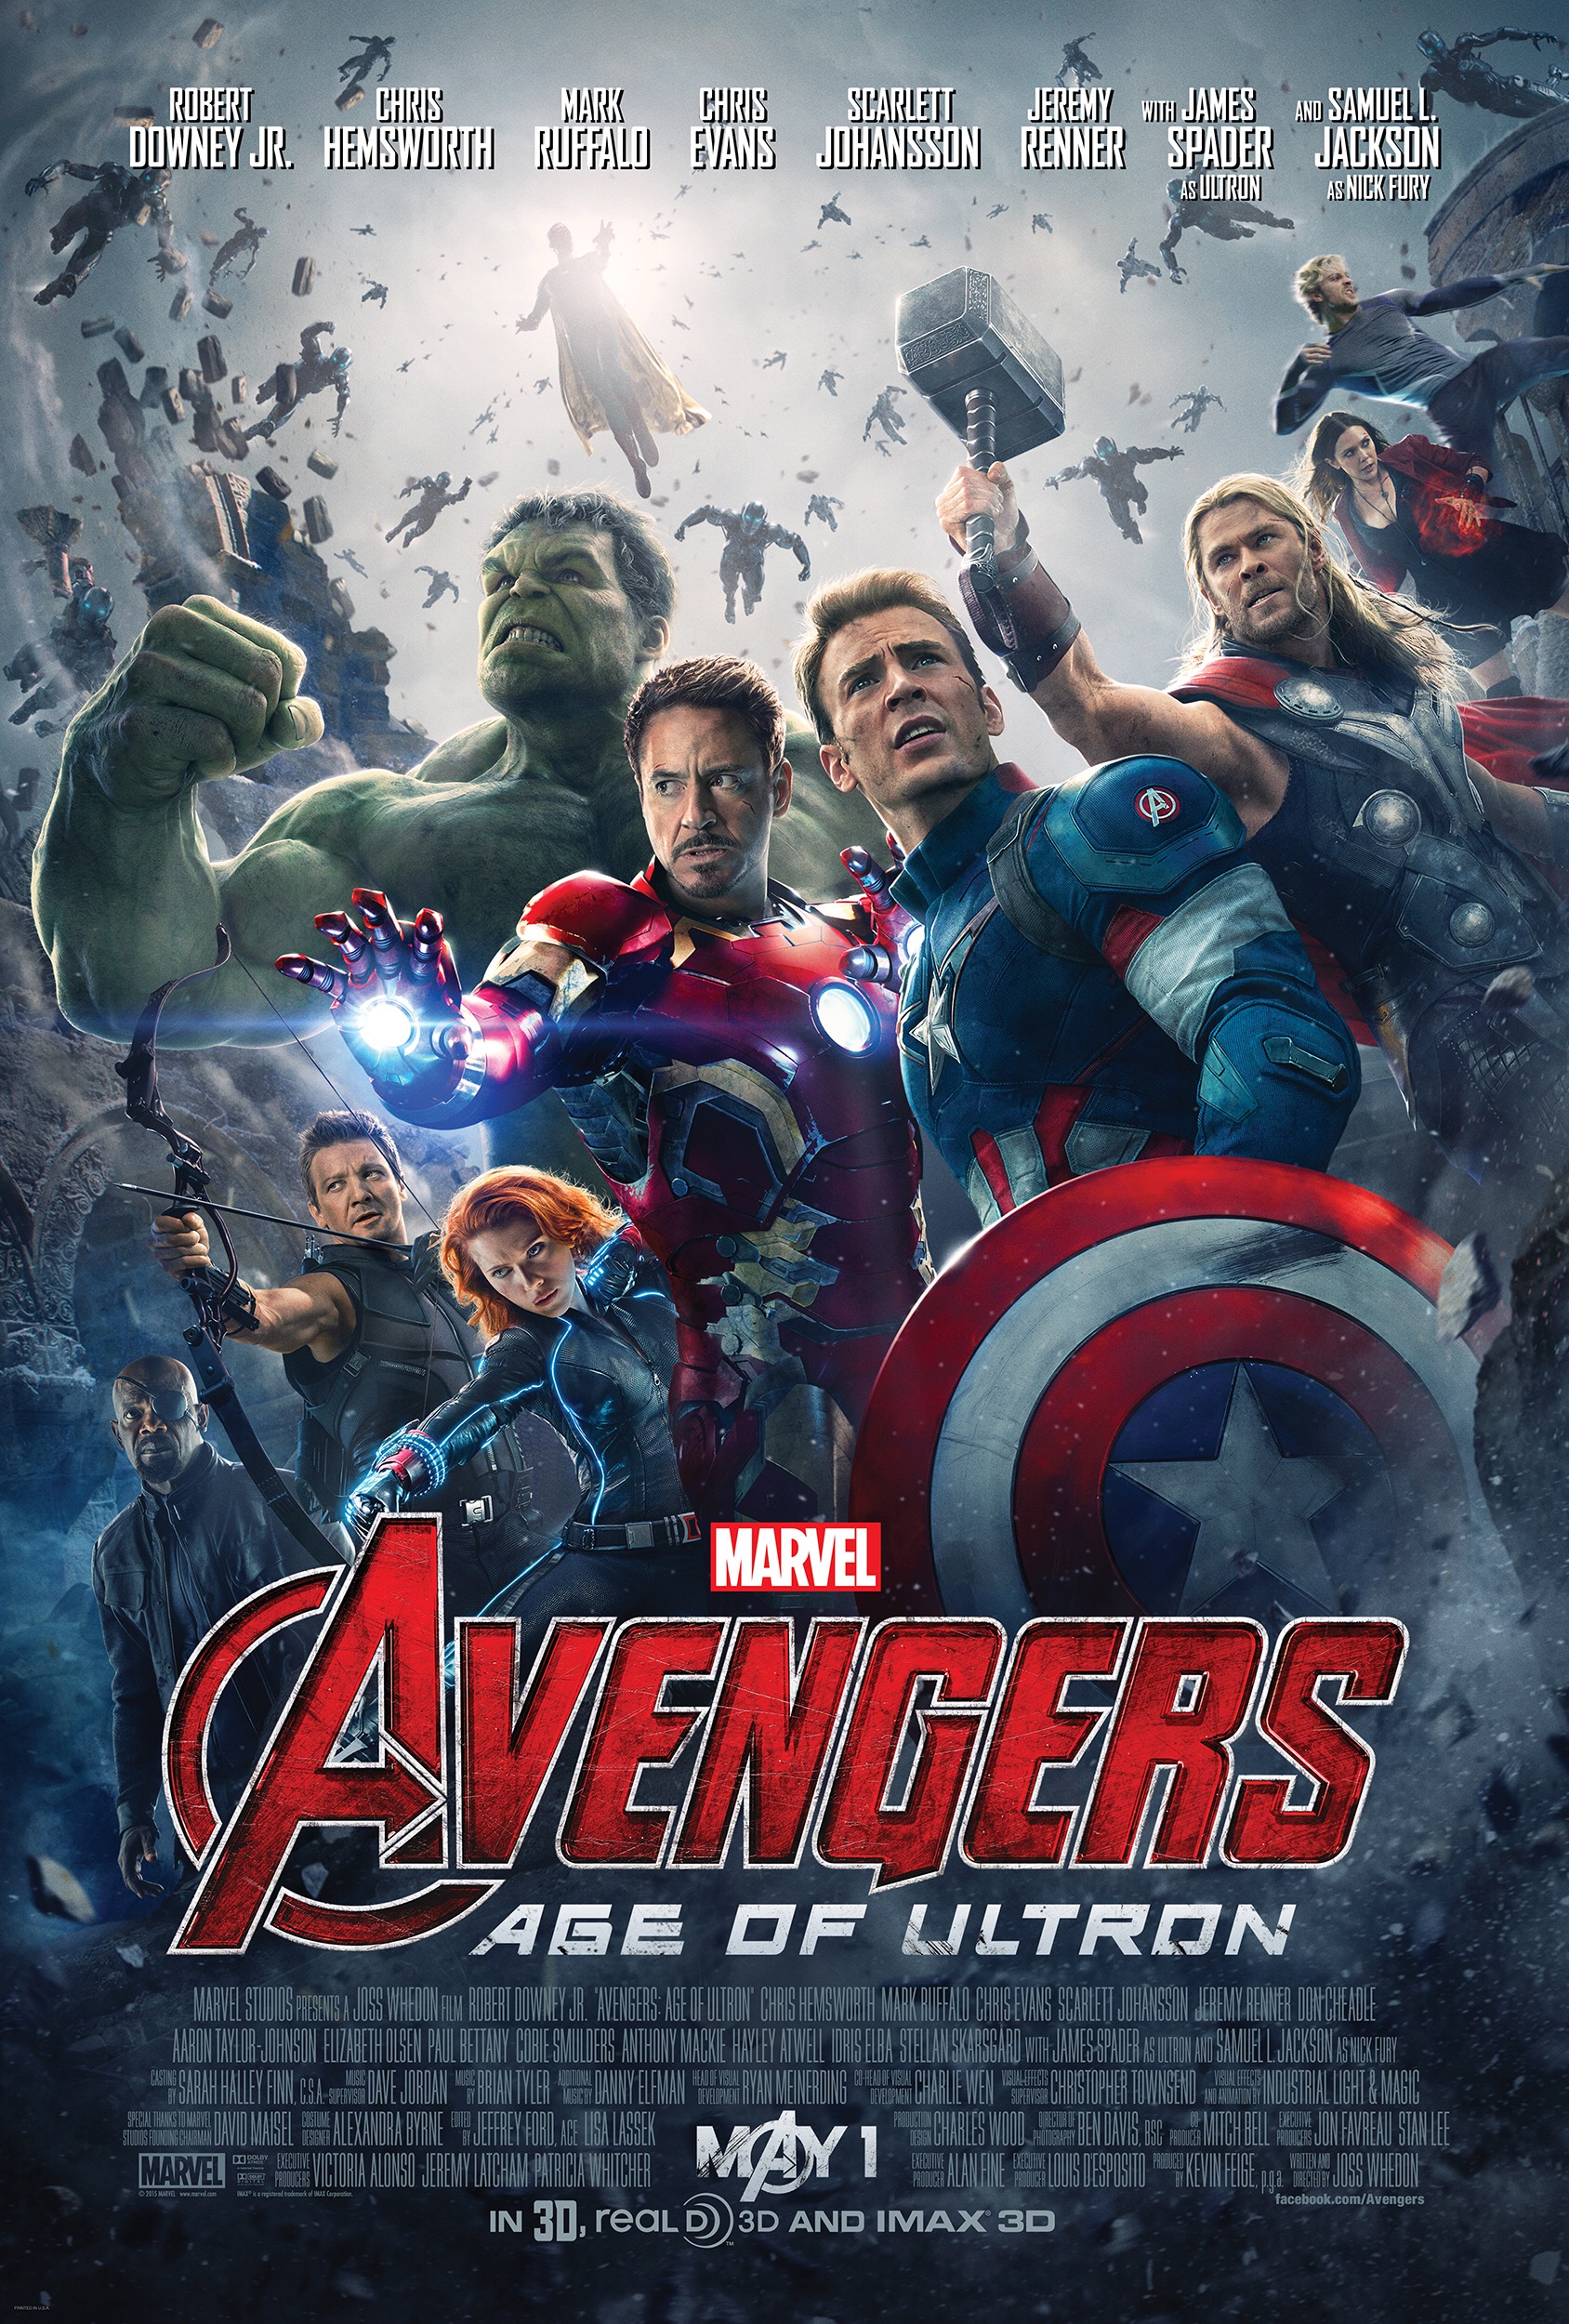 Avengers Age of Ultron Review | SparklyEverAfter.com